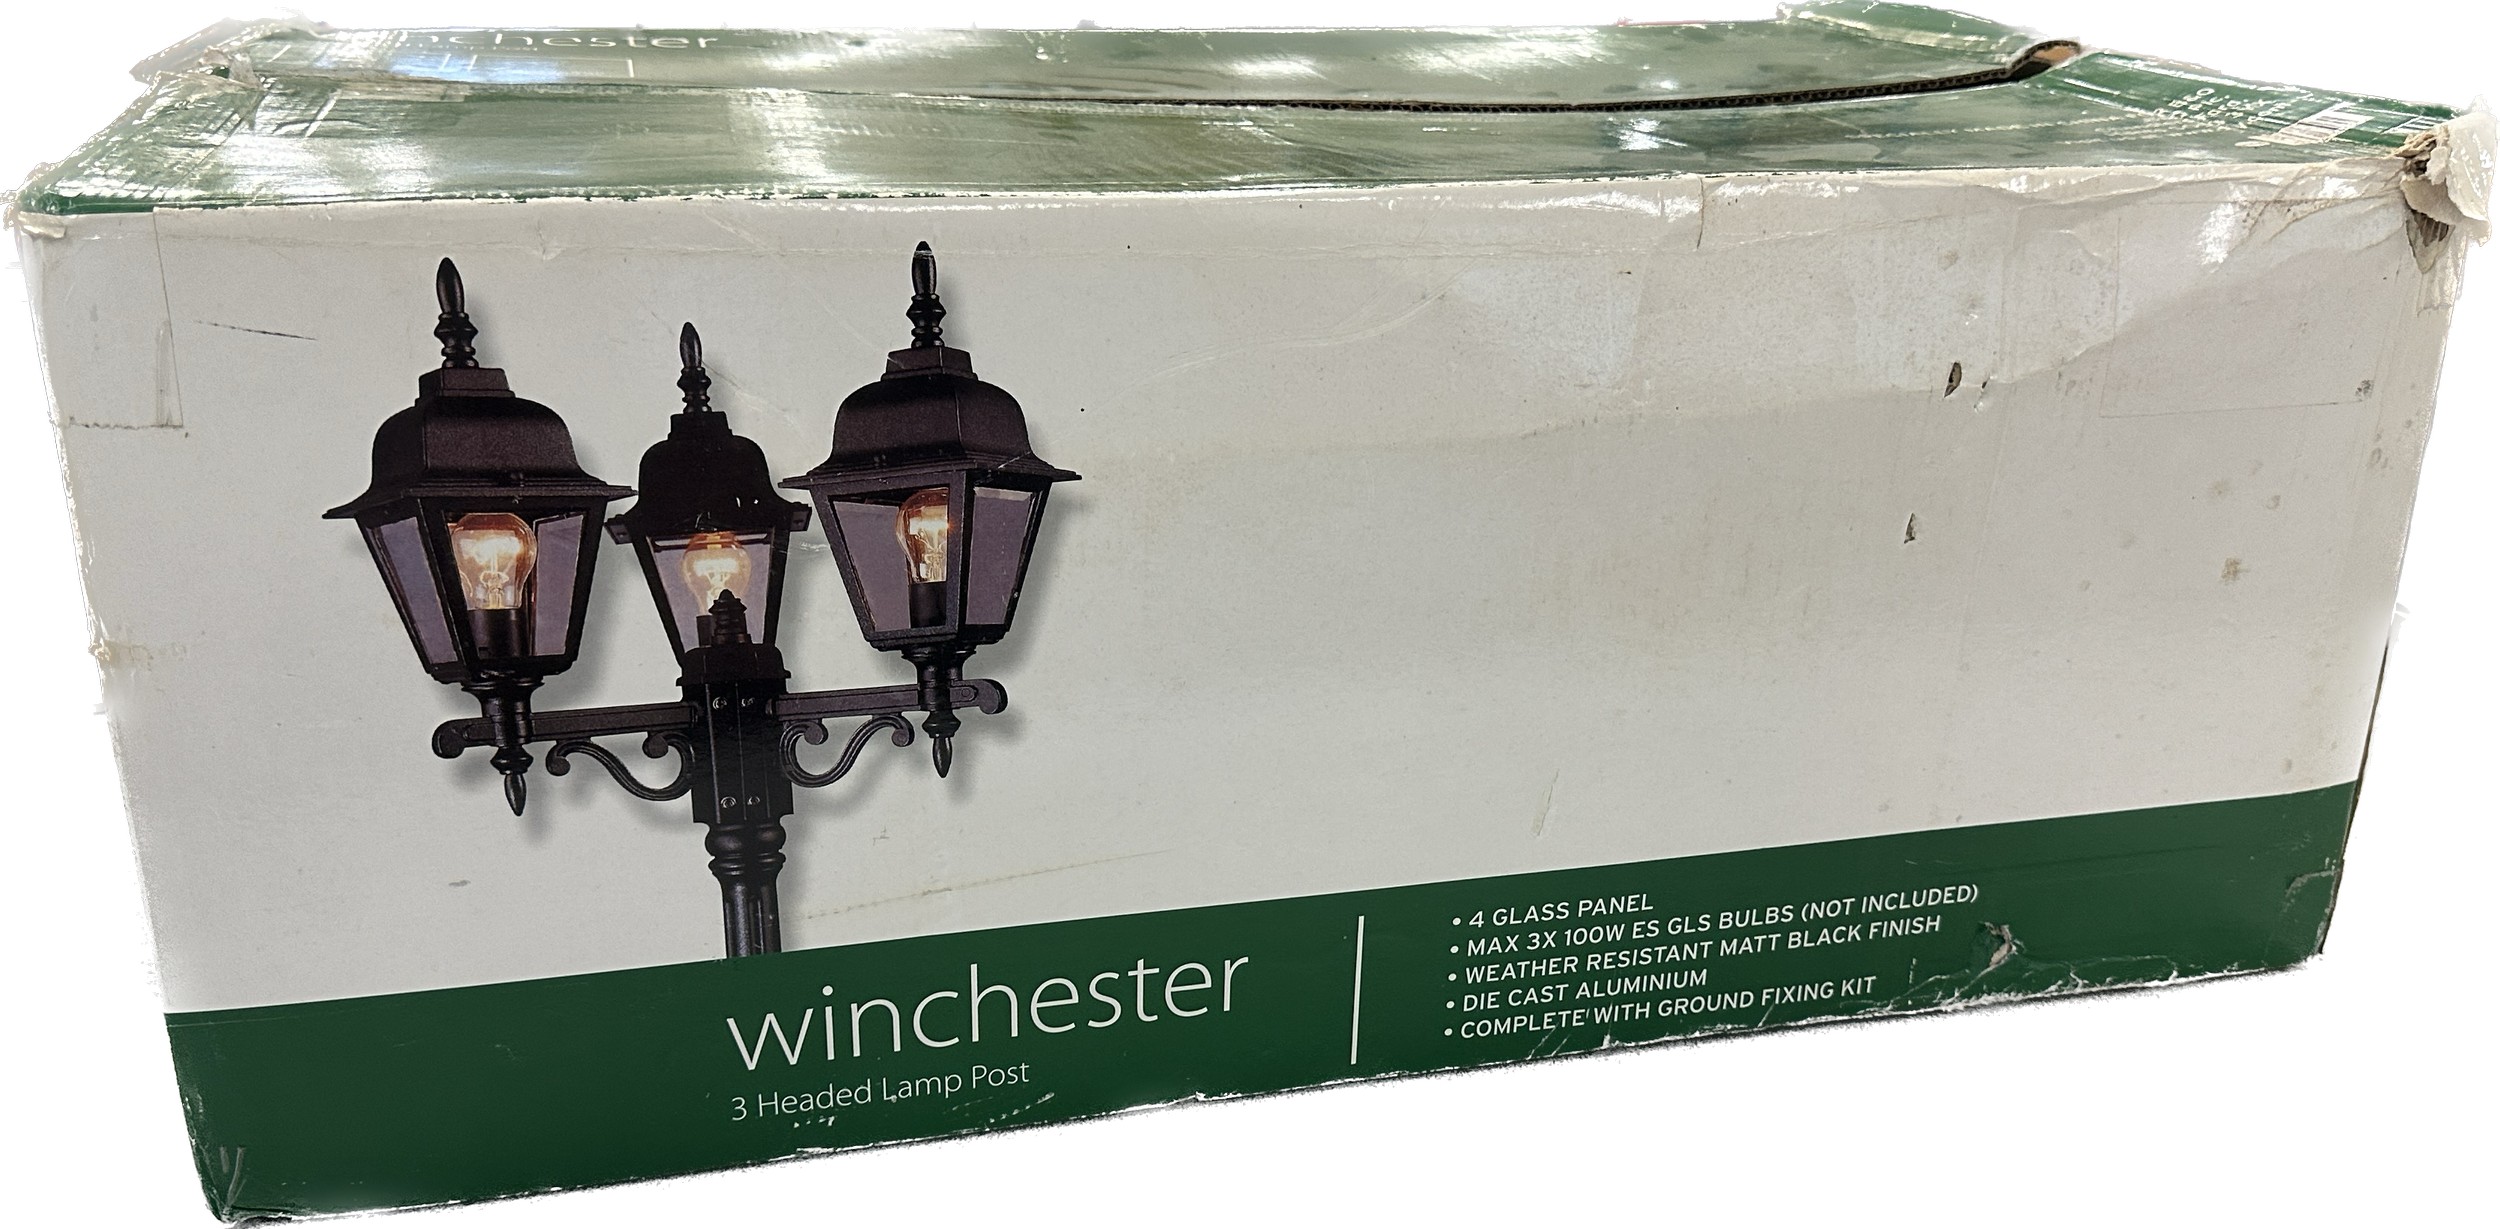 Boxed Winchester 3 headed lamp post - Image 2 of 2